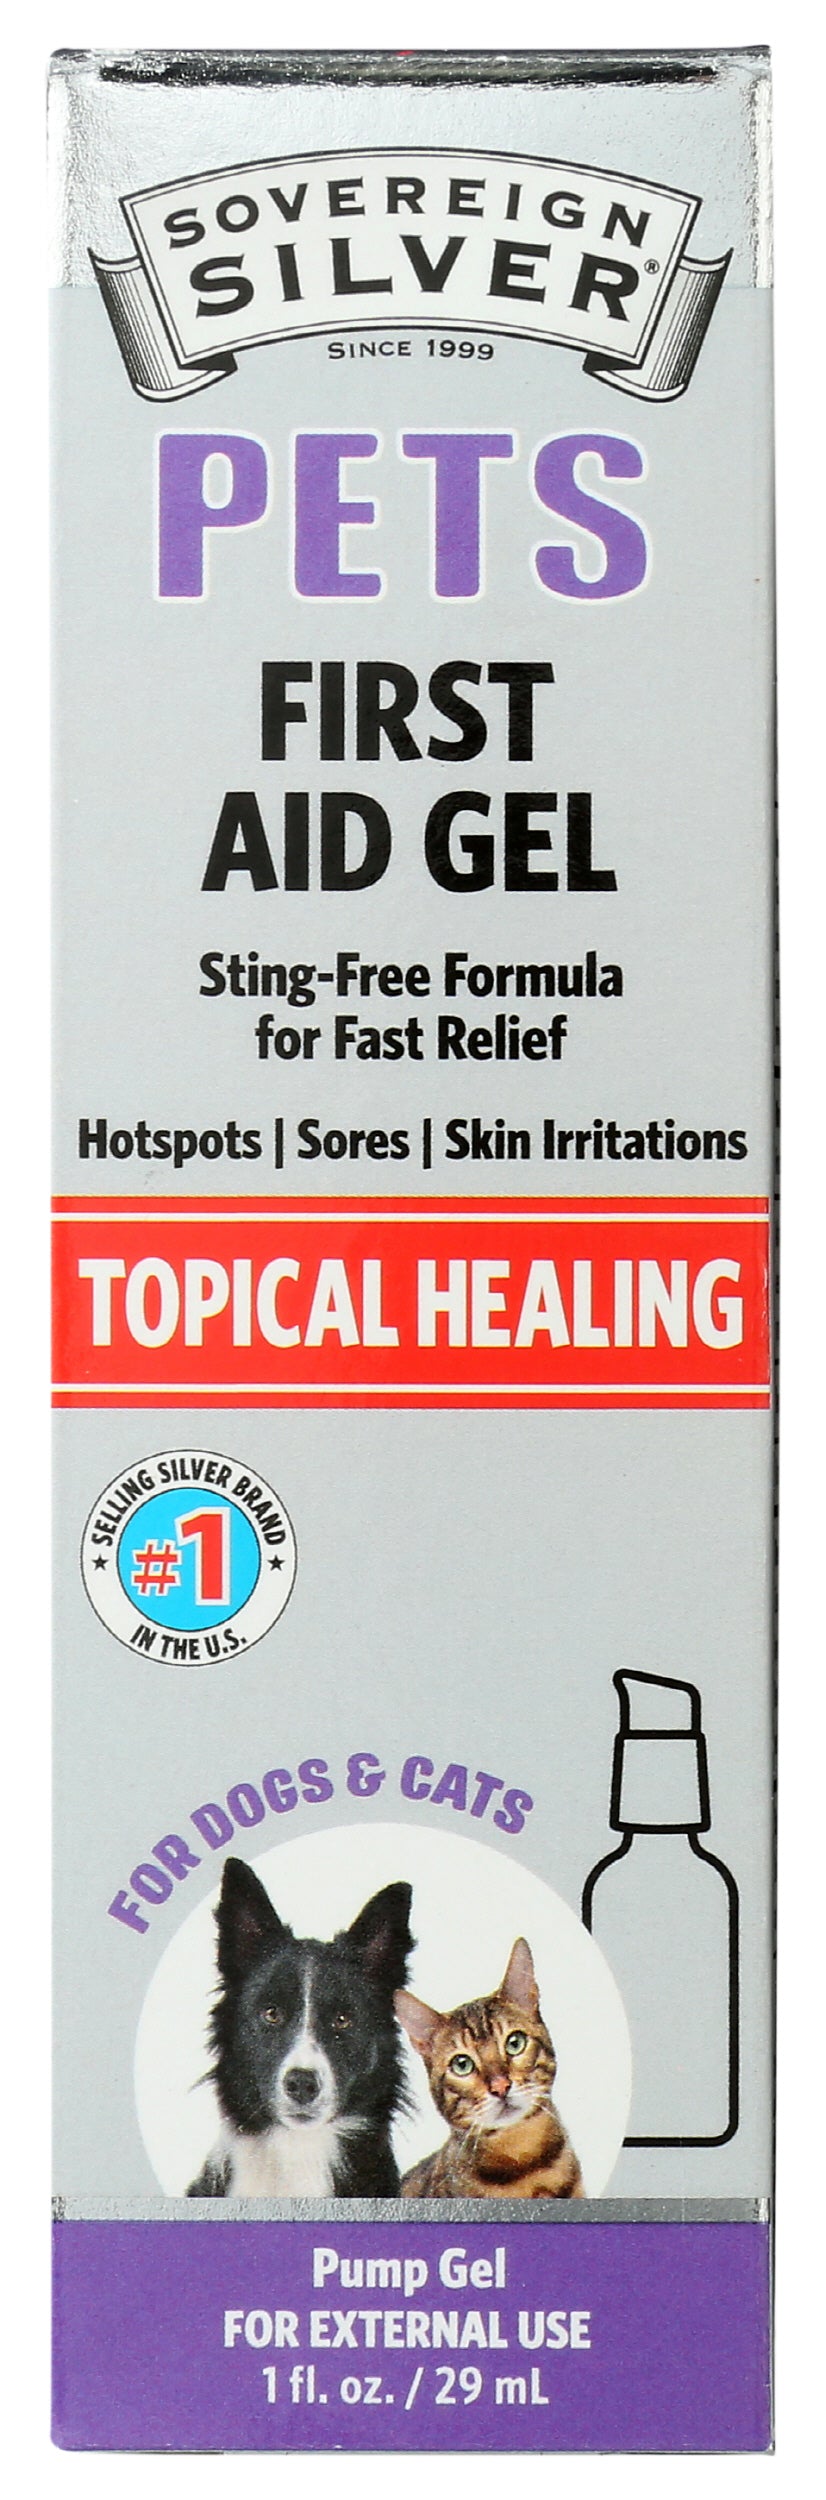 Sovereign Silver Pets First Aid Gel 1 Fl. Oz. Front of Box